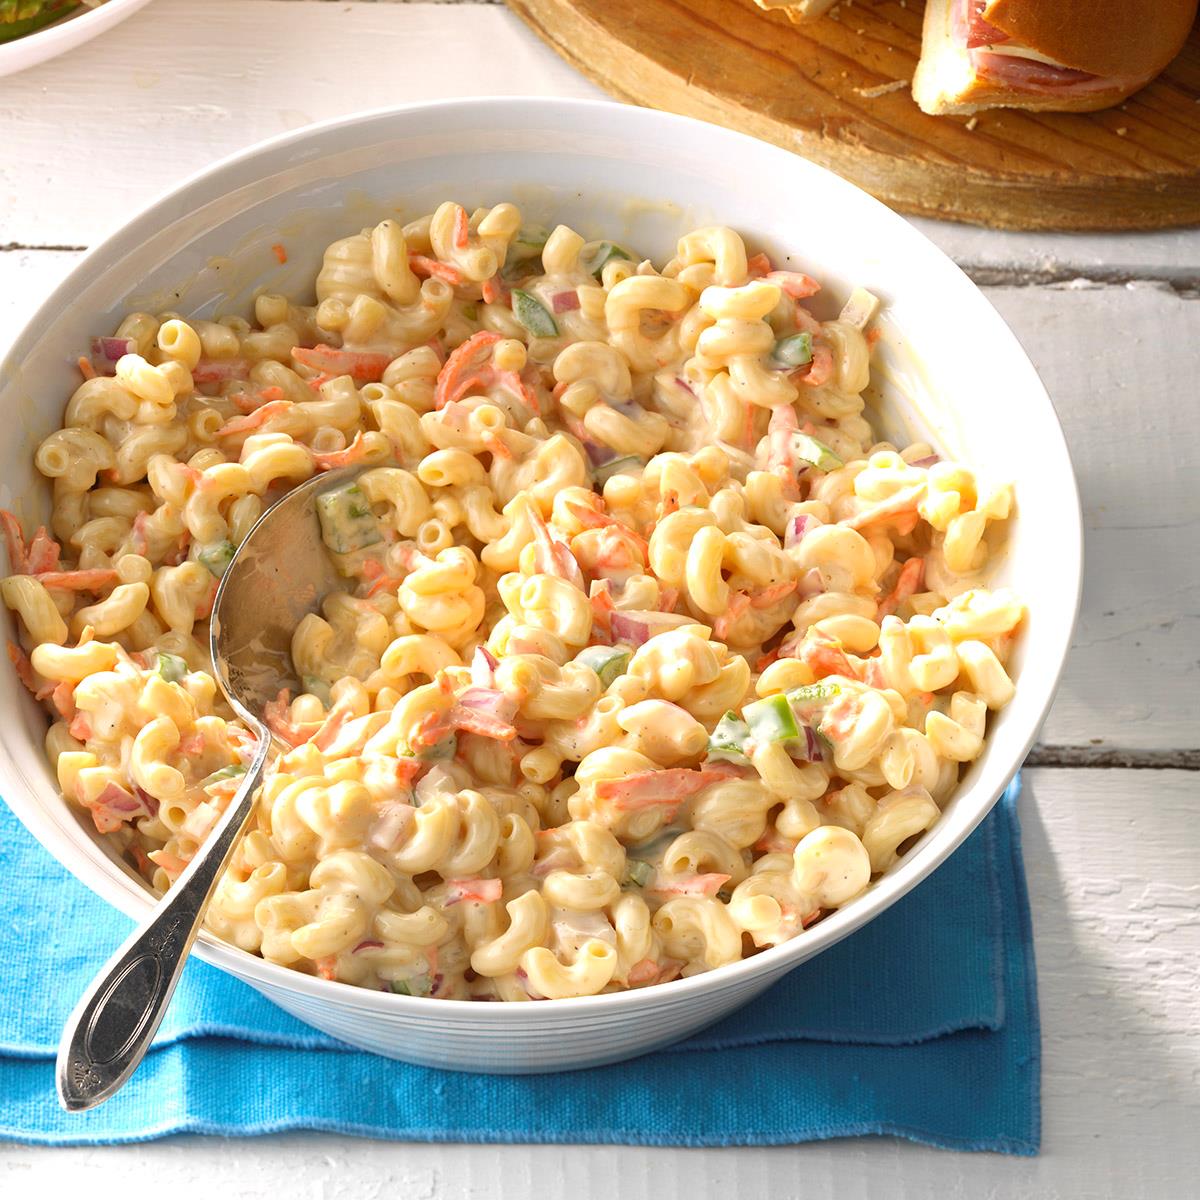 A sweet out-of-the-ordinary dressing makes this macaroni salad special. My aunt gave me the recipe and it has become one of my favorites. I occasionally leave out the green pepper if I know that people don't like it, and it still tastes great. —Idalee Scholz, Cocoa Beach, Florida <a href="https://www.tasteofhome.com/recipes/sweet-macaroni-salad/">Get Recipe</a>